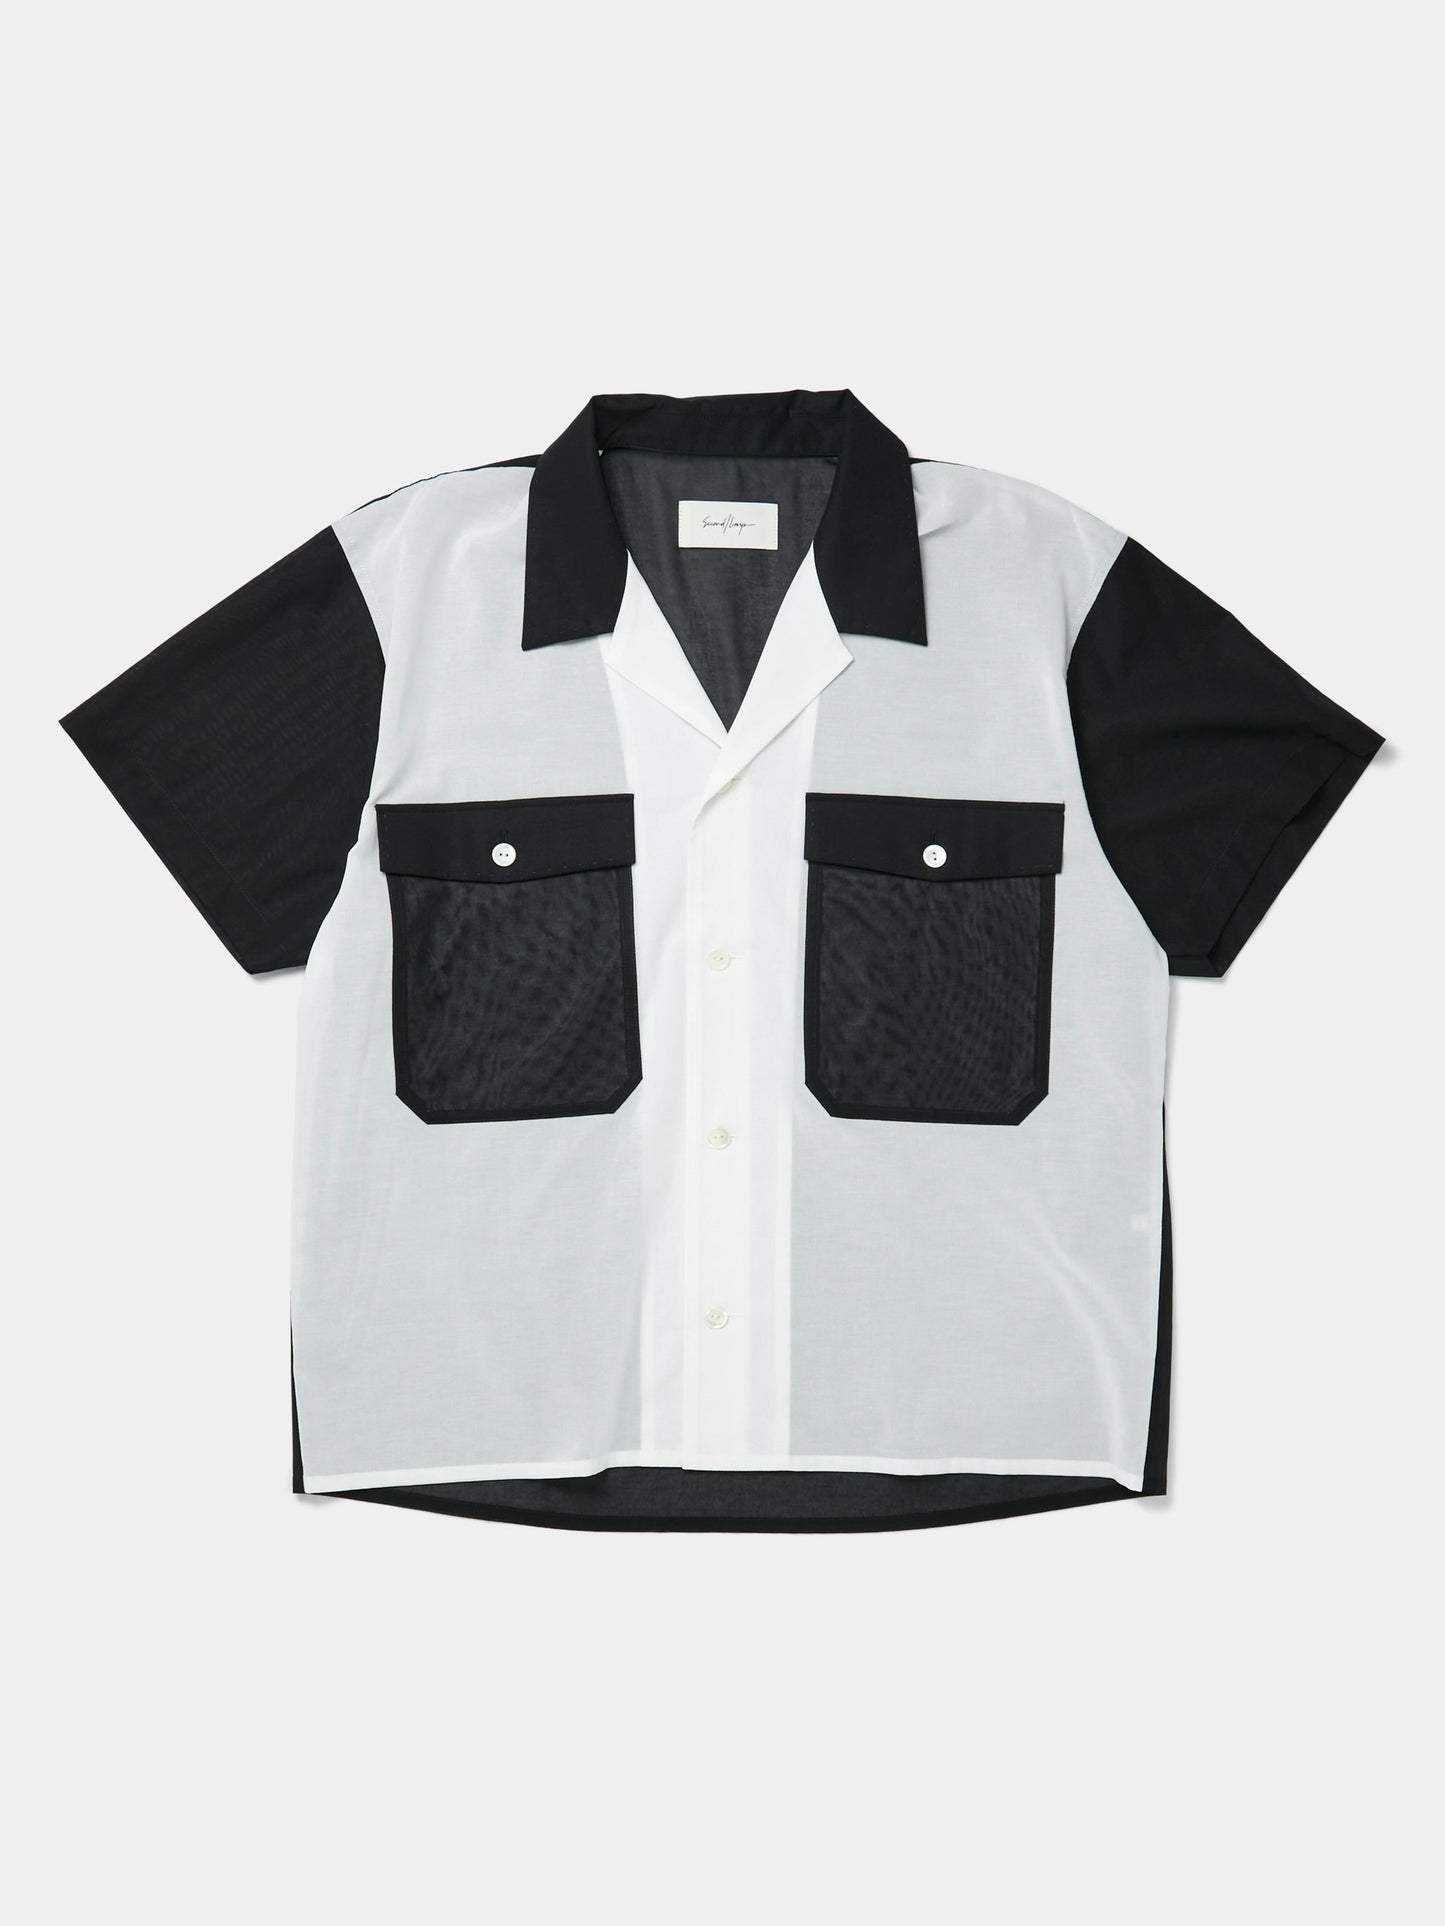 Cropped Open Collar S/S Shirt